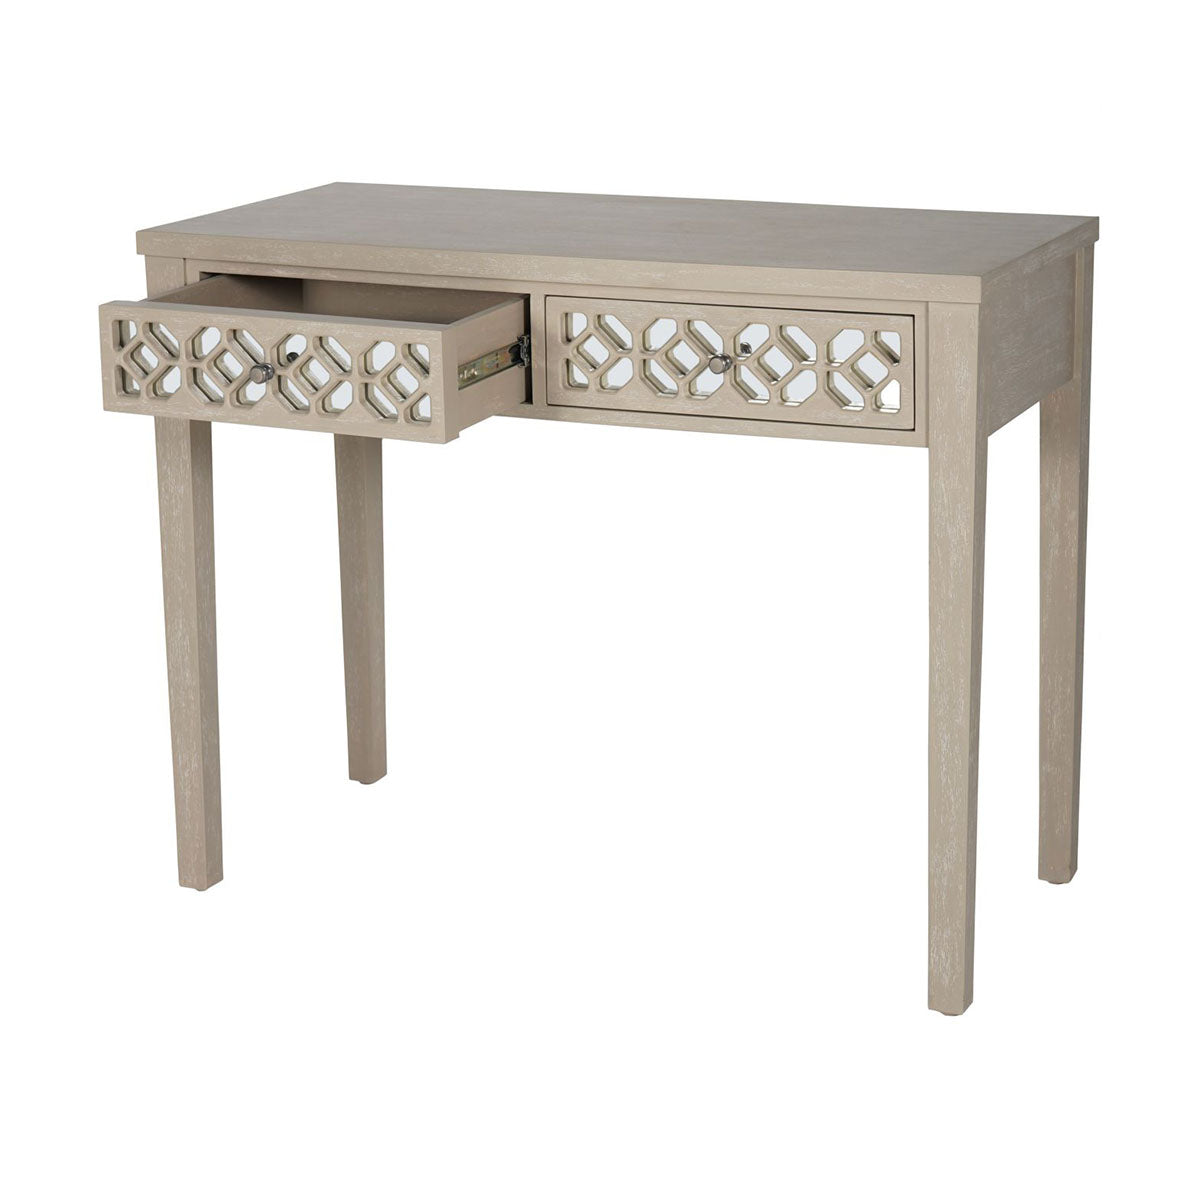 Campbell 2 Drawer Console Table 100cm